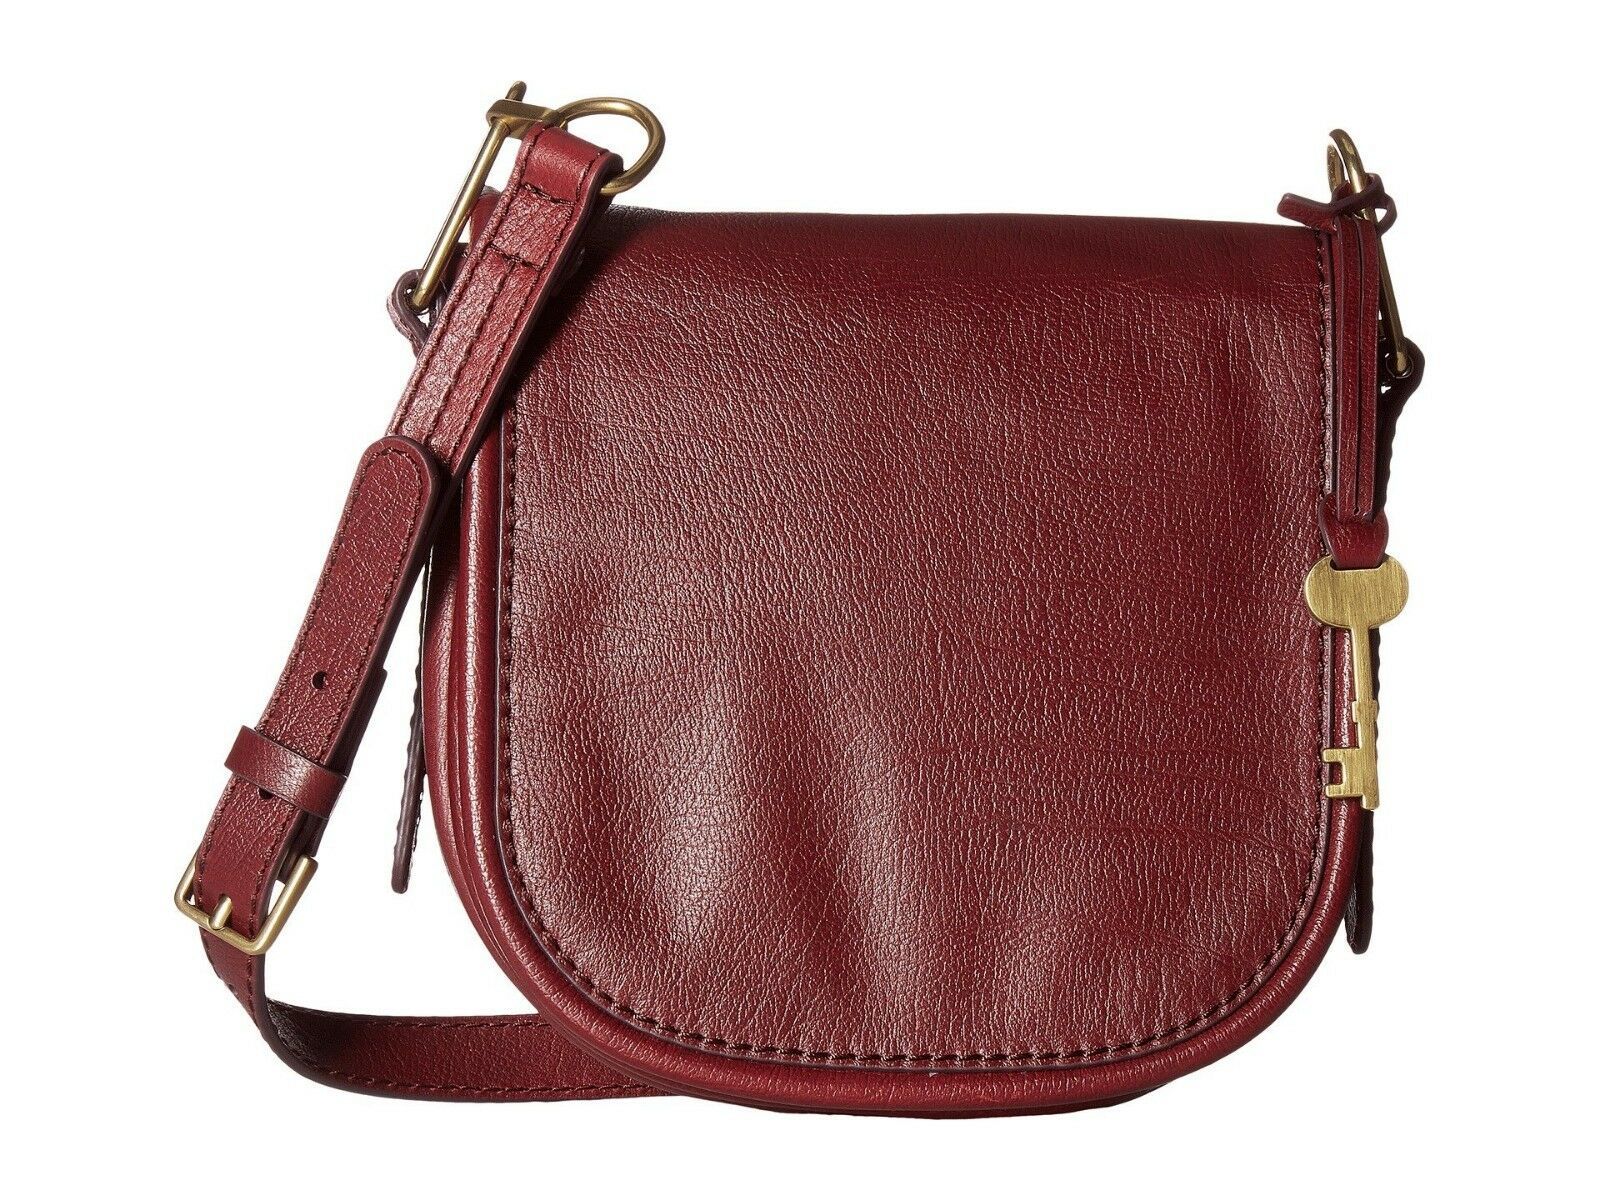 New Fossil Women's Rumi Small Leather Crossbody Bags Variety Colors